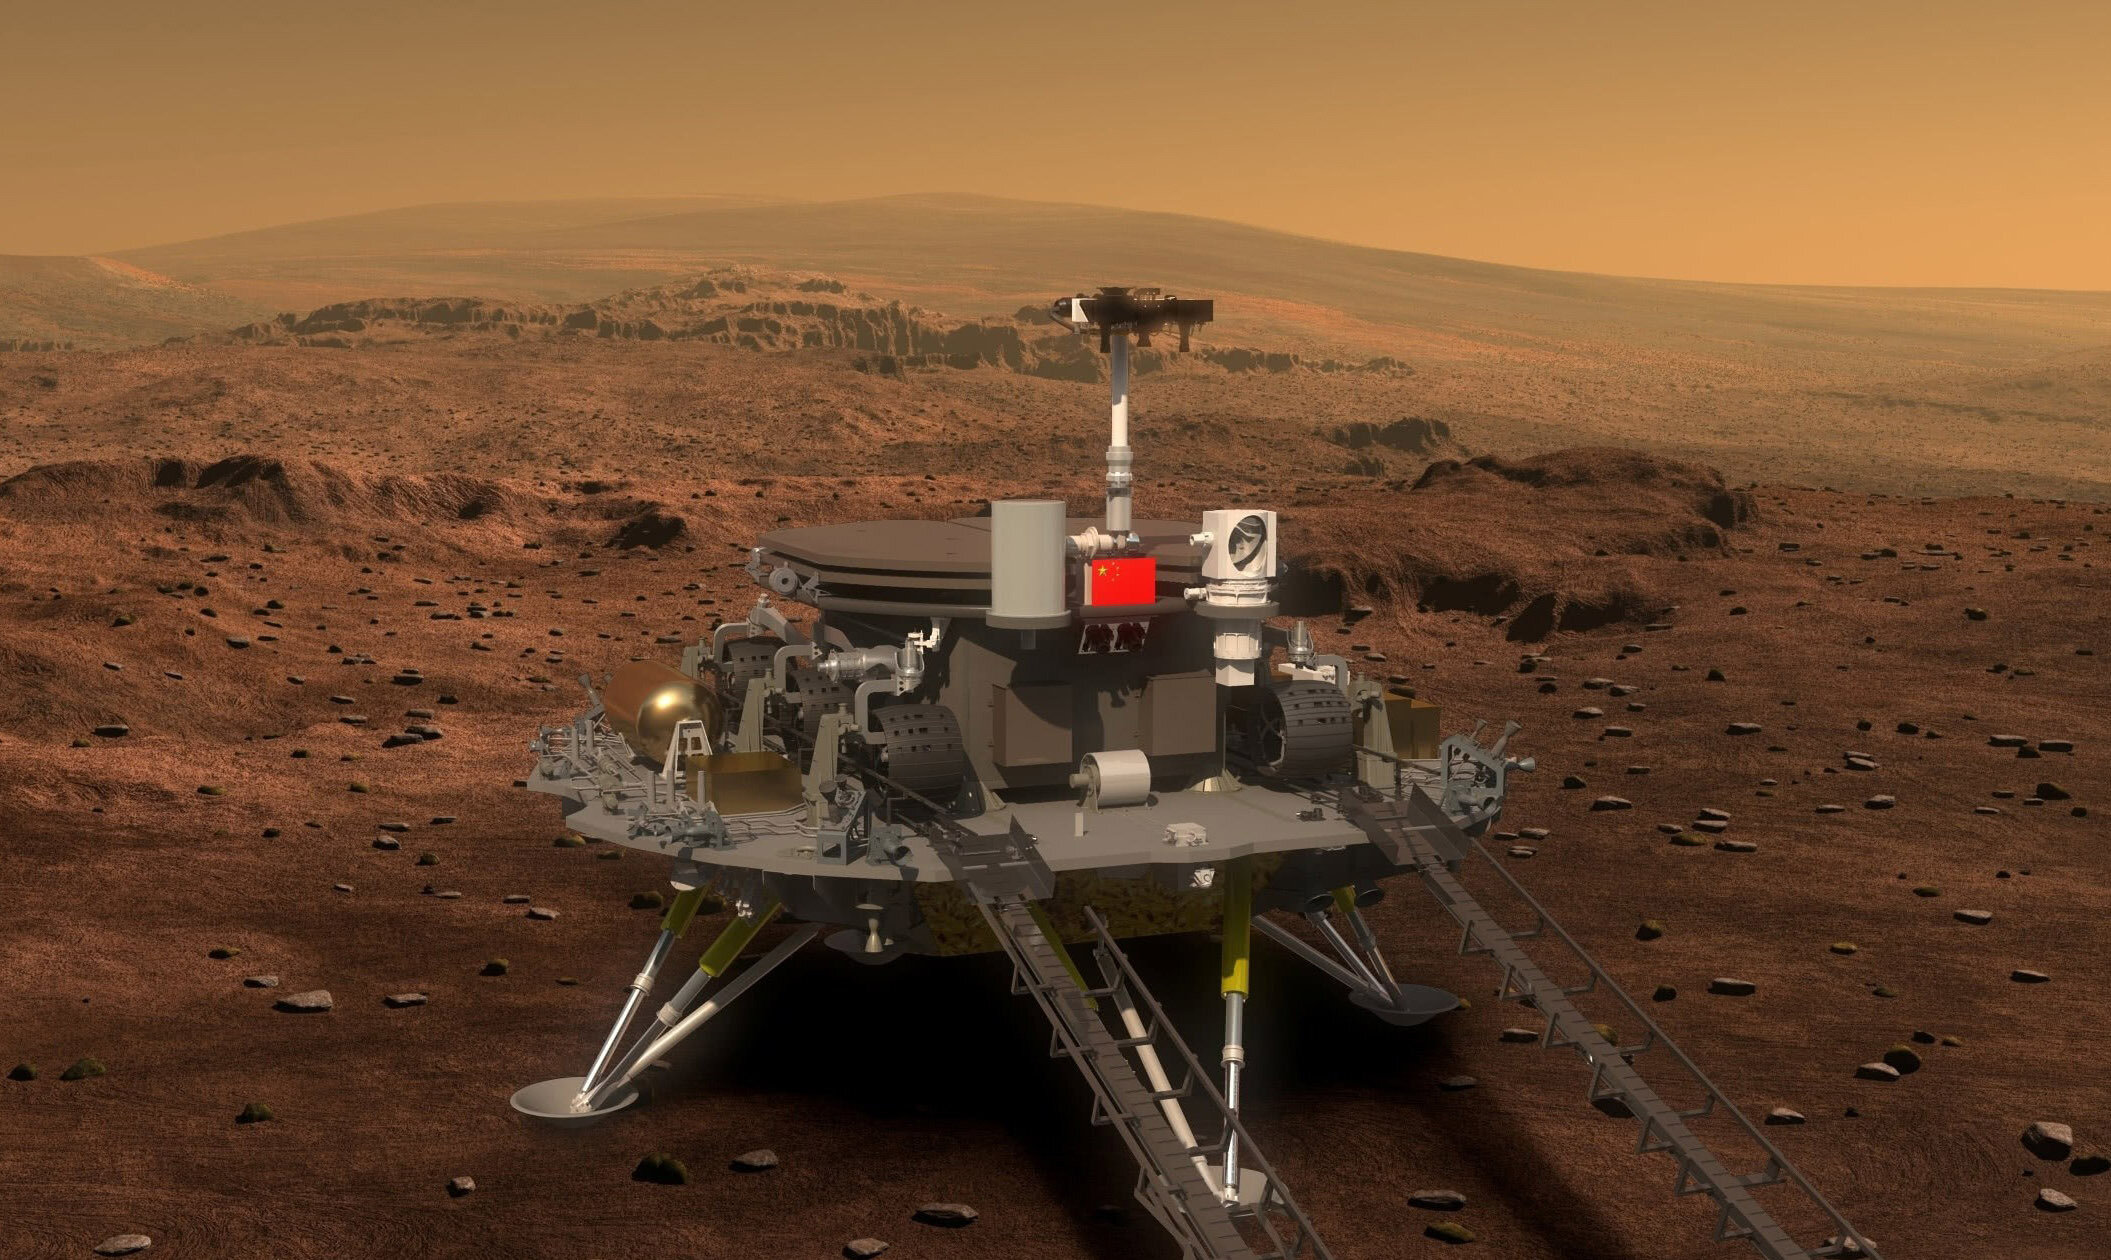 China Becomes 2nd Nation to Operate on Mars Promising More Eyes and More Discoveries